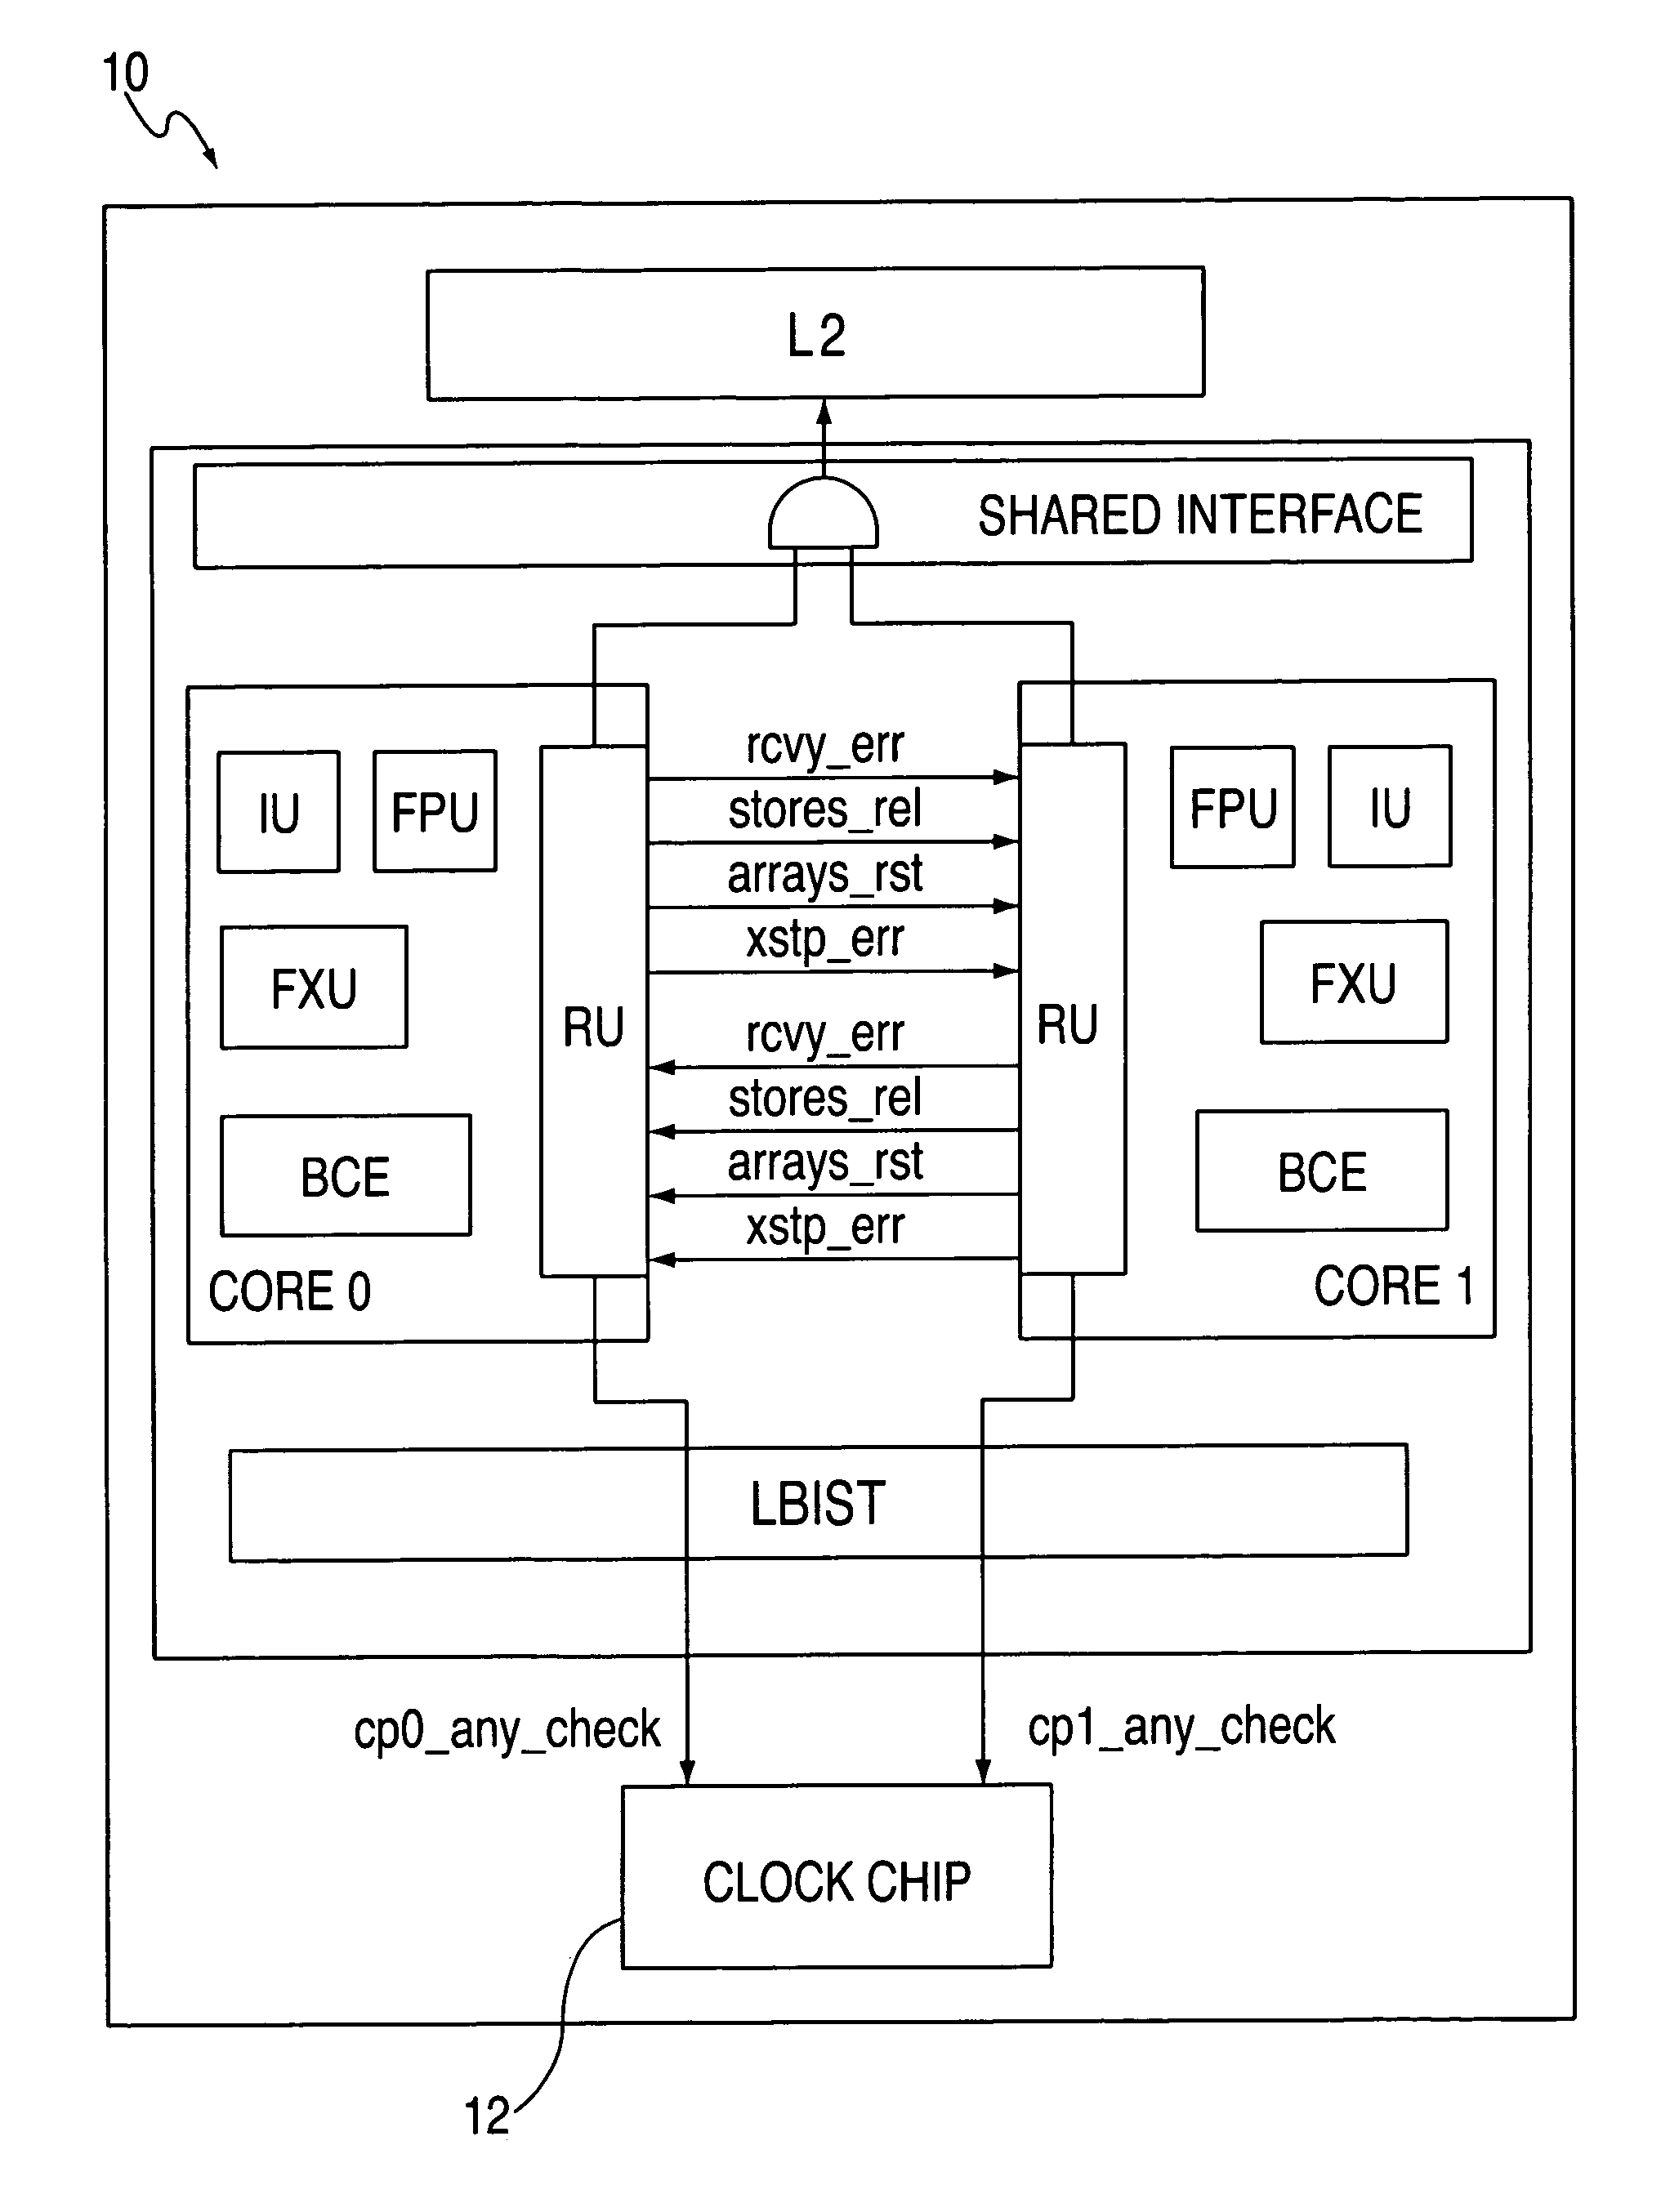 System and method for providing processor recovery in a multi-core system